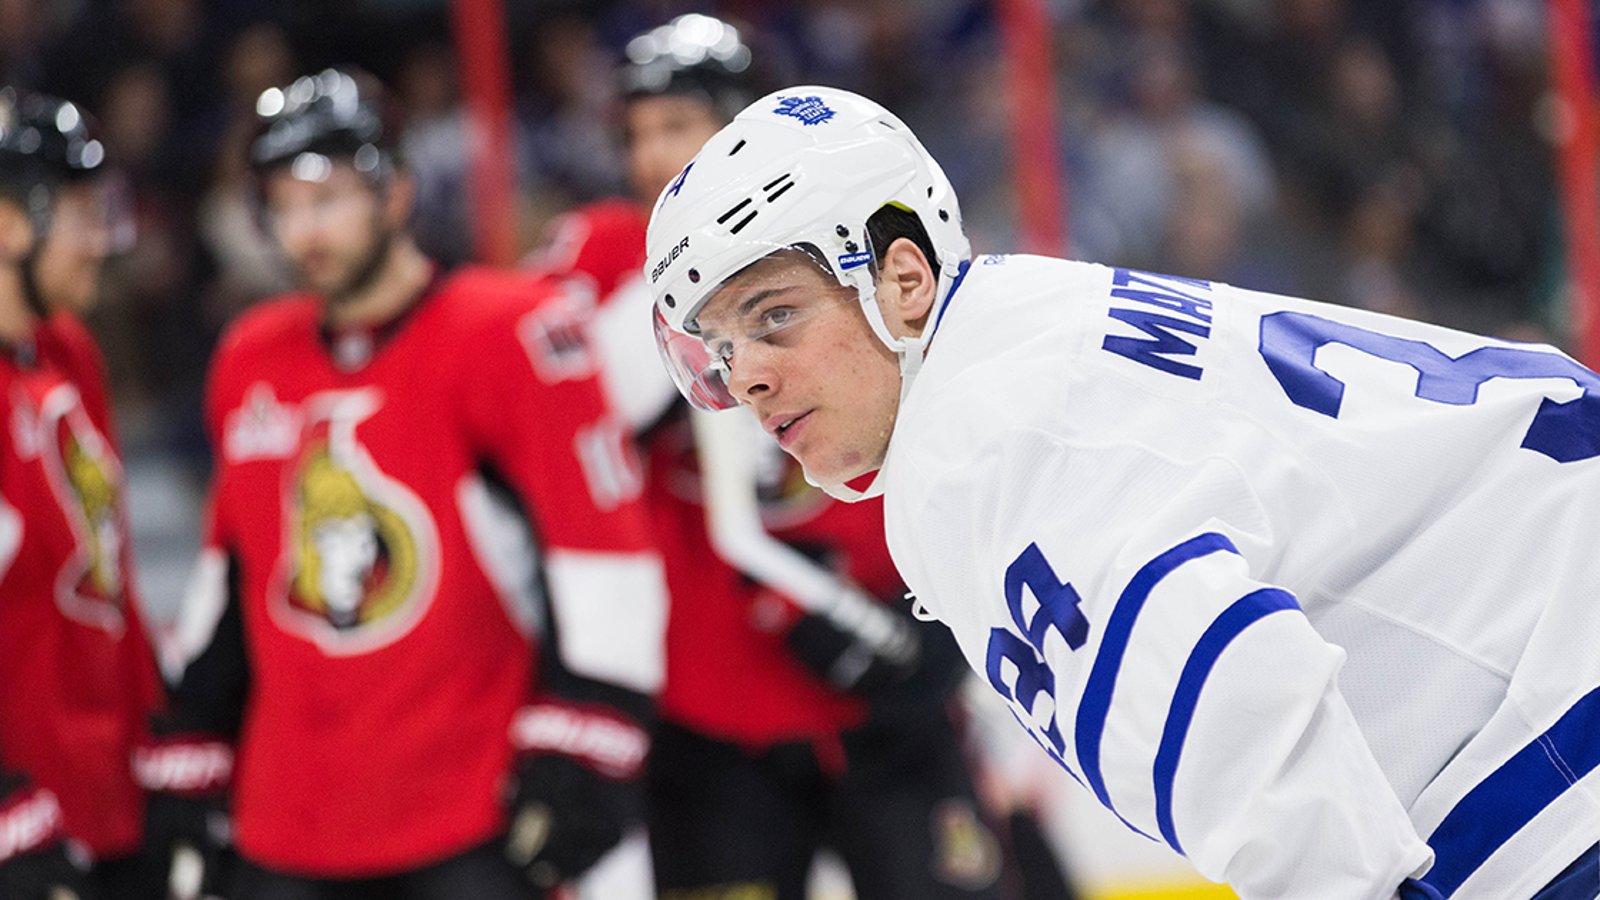 Your Cal: Who’s better? The Sens or Leafs?